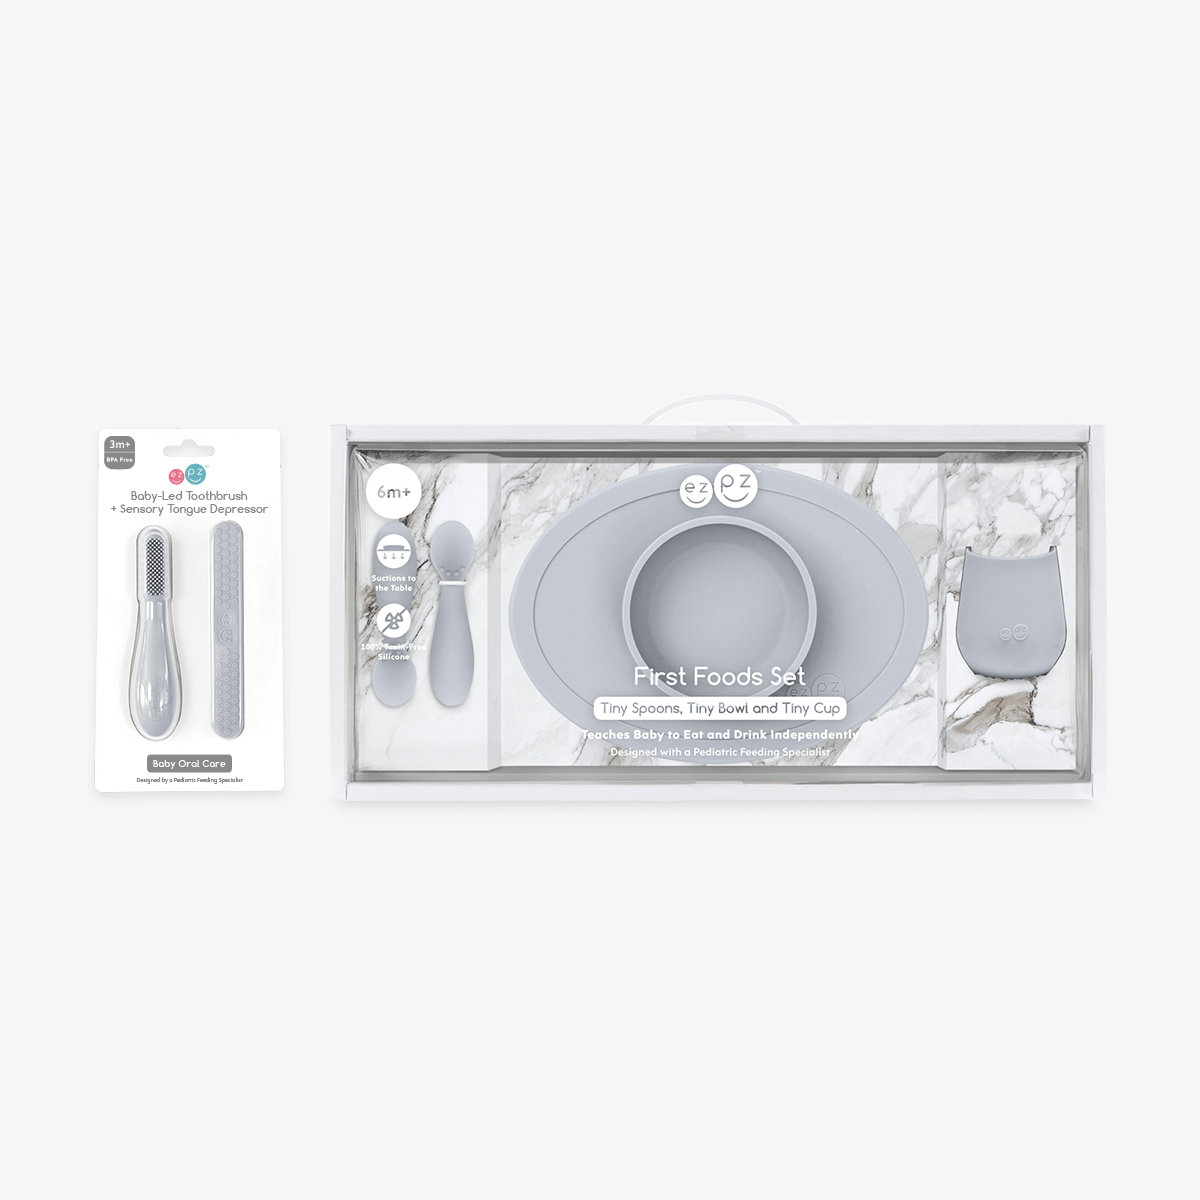 First Foods Oral Care Bundle in Pewter Gray / ezpz Baby-Led™ Toothbrush + Sensory Tongue Depressor Dual Pack and First Foods Set